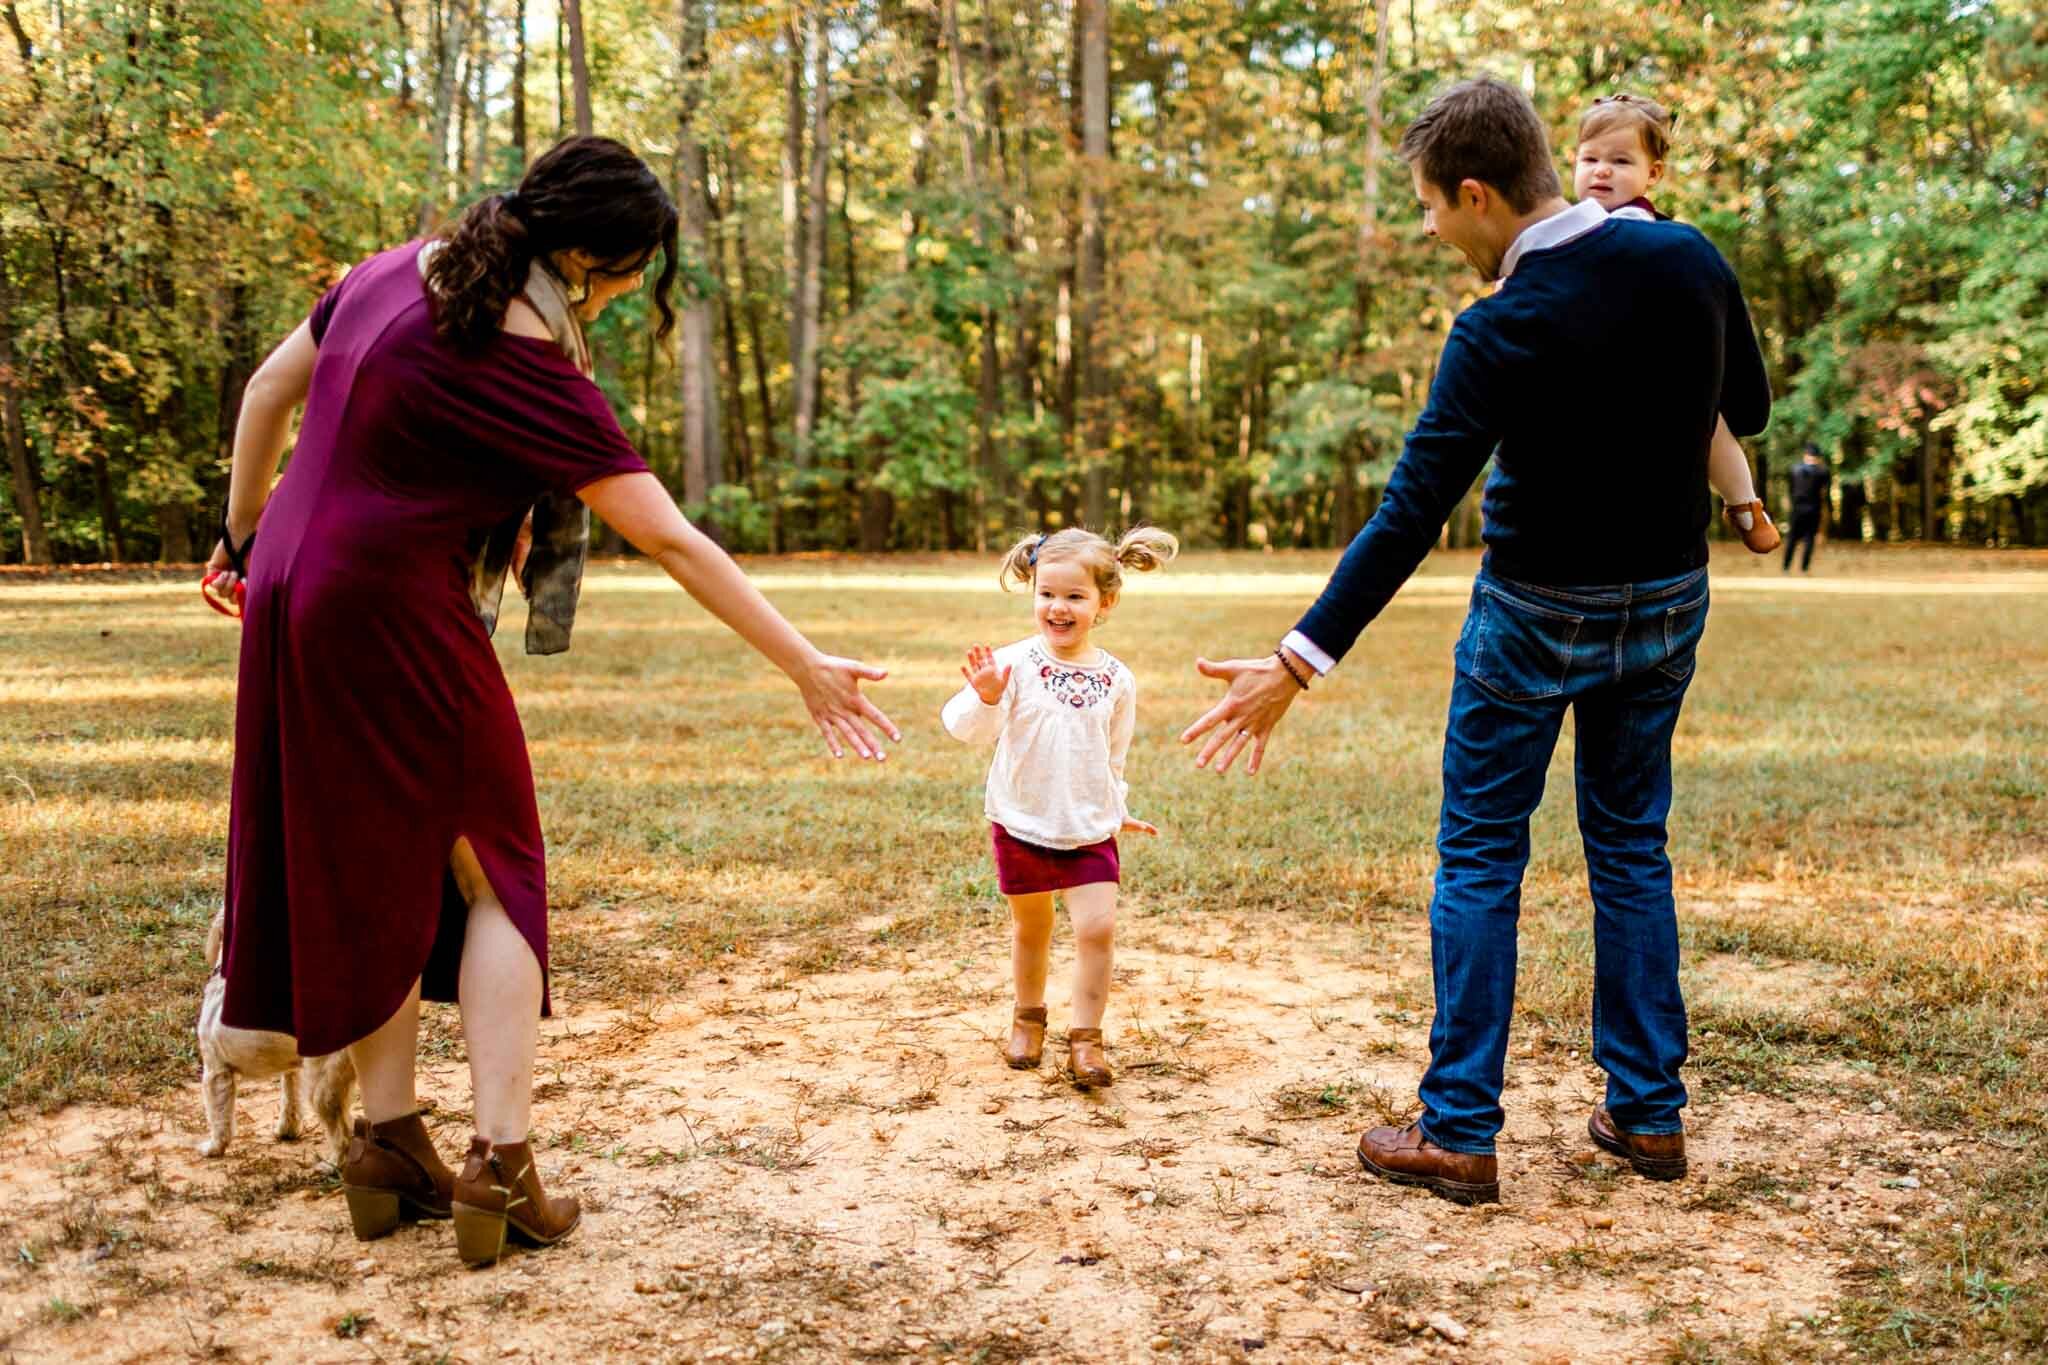 Raleigh Family Photographer | By G. Lin Photography | Umstead Park | Young girl giving high fives to parents